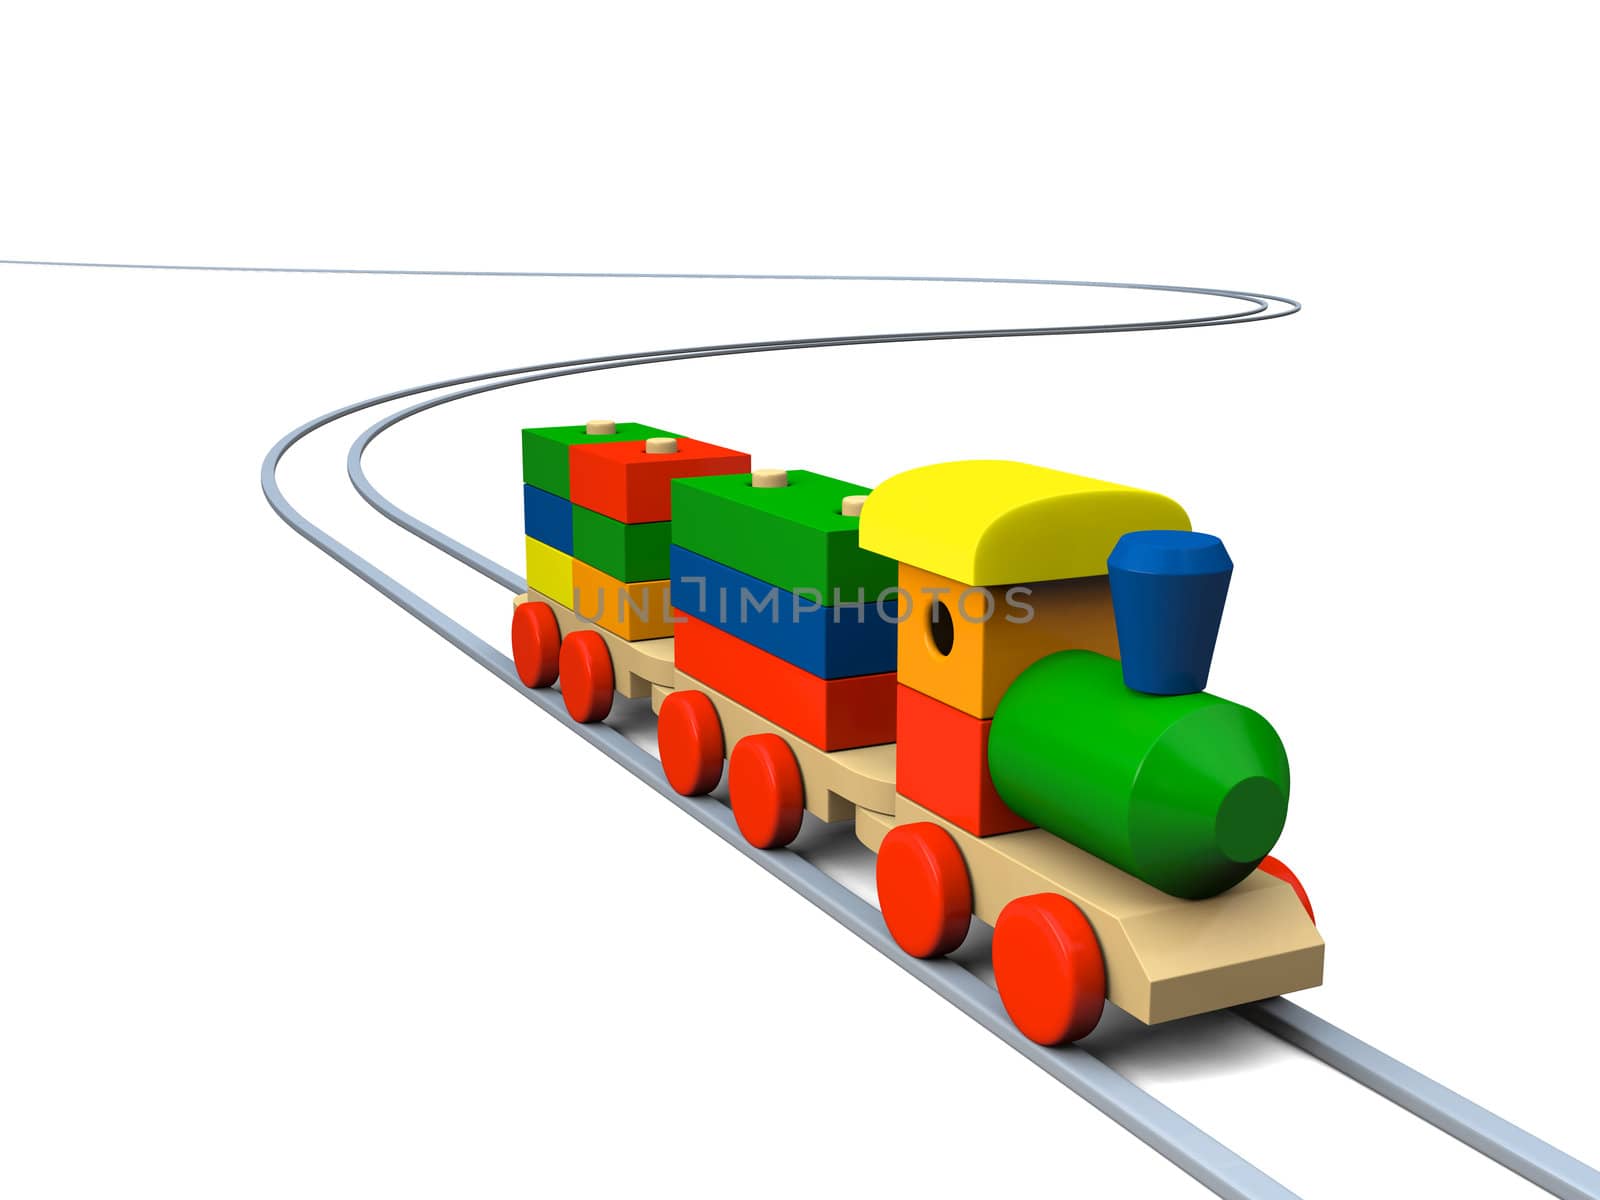 Wooden toy train illustration by Harvepino